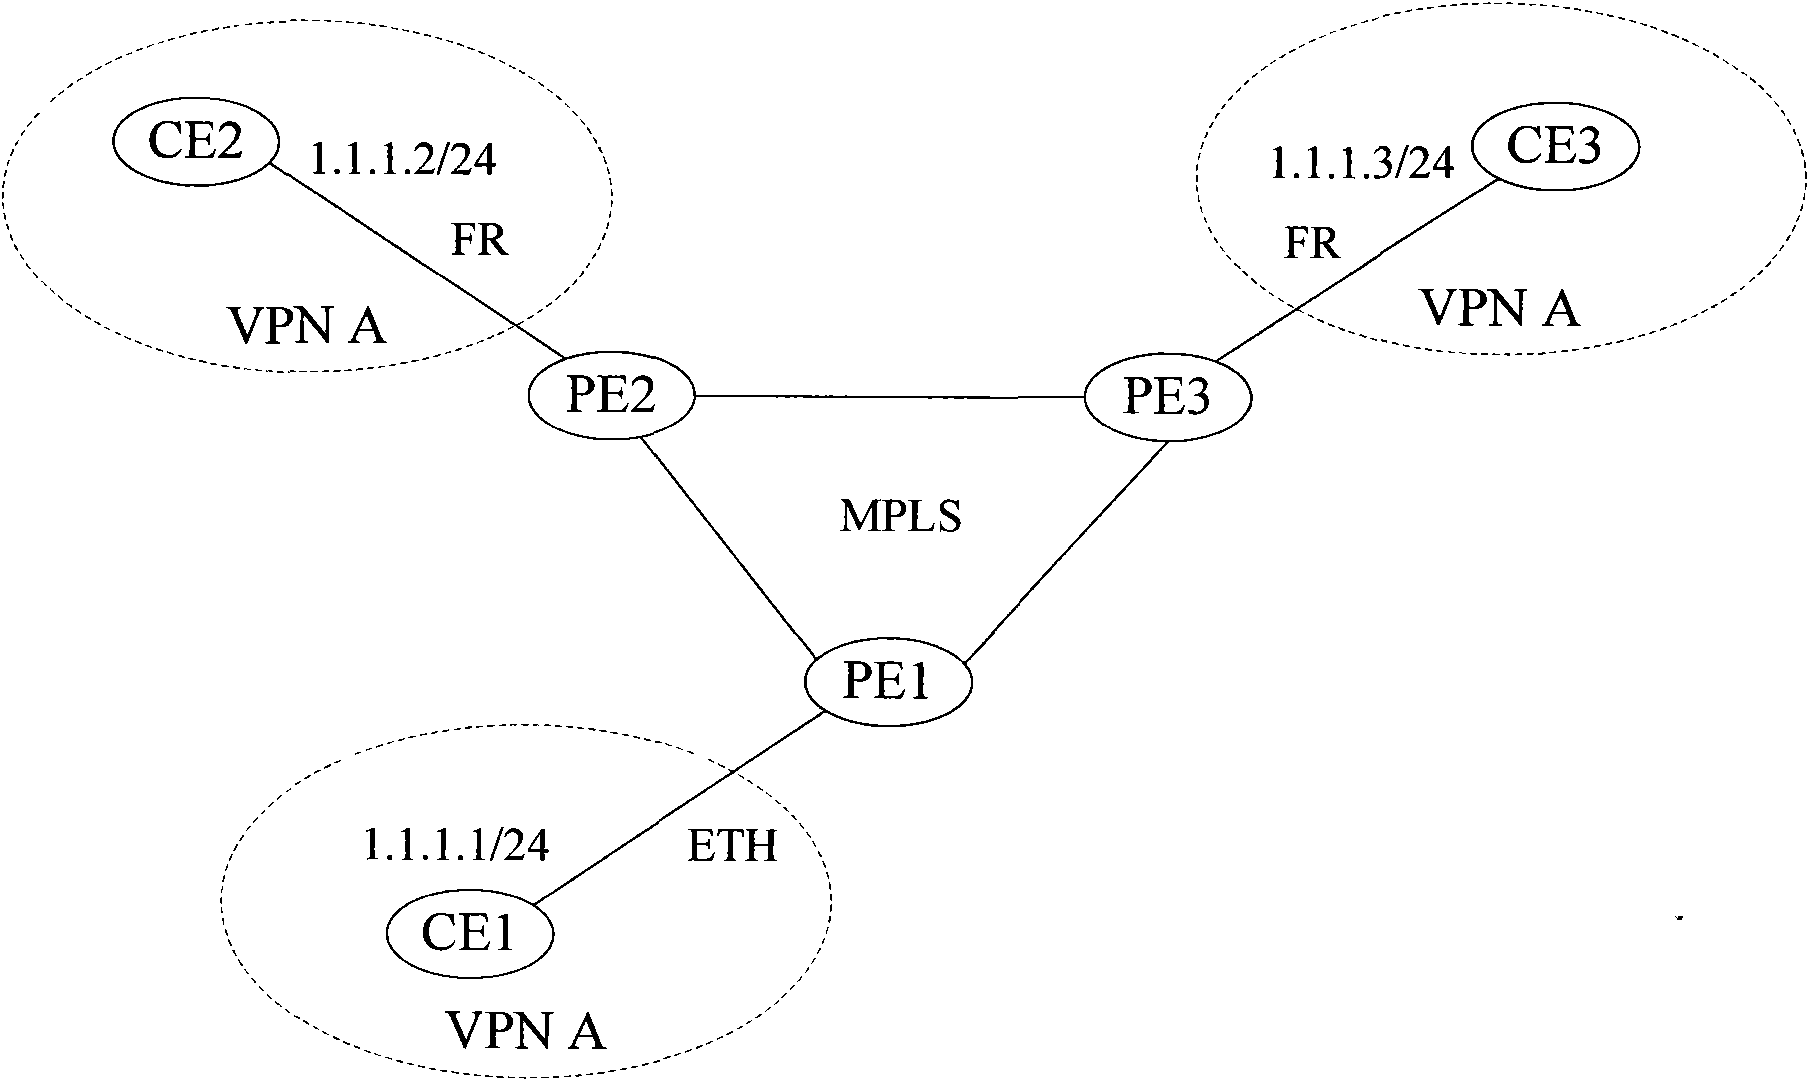 Method of transmitting and receiving message and a provider edge router